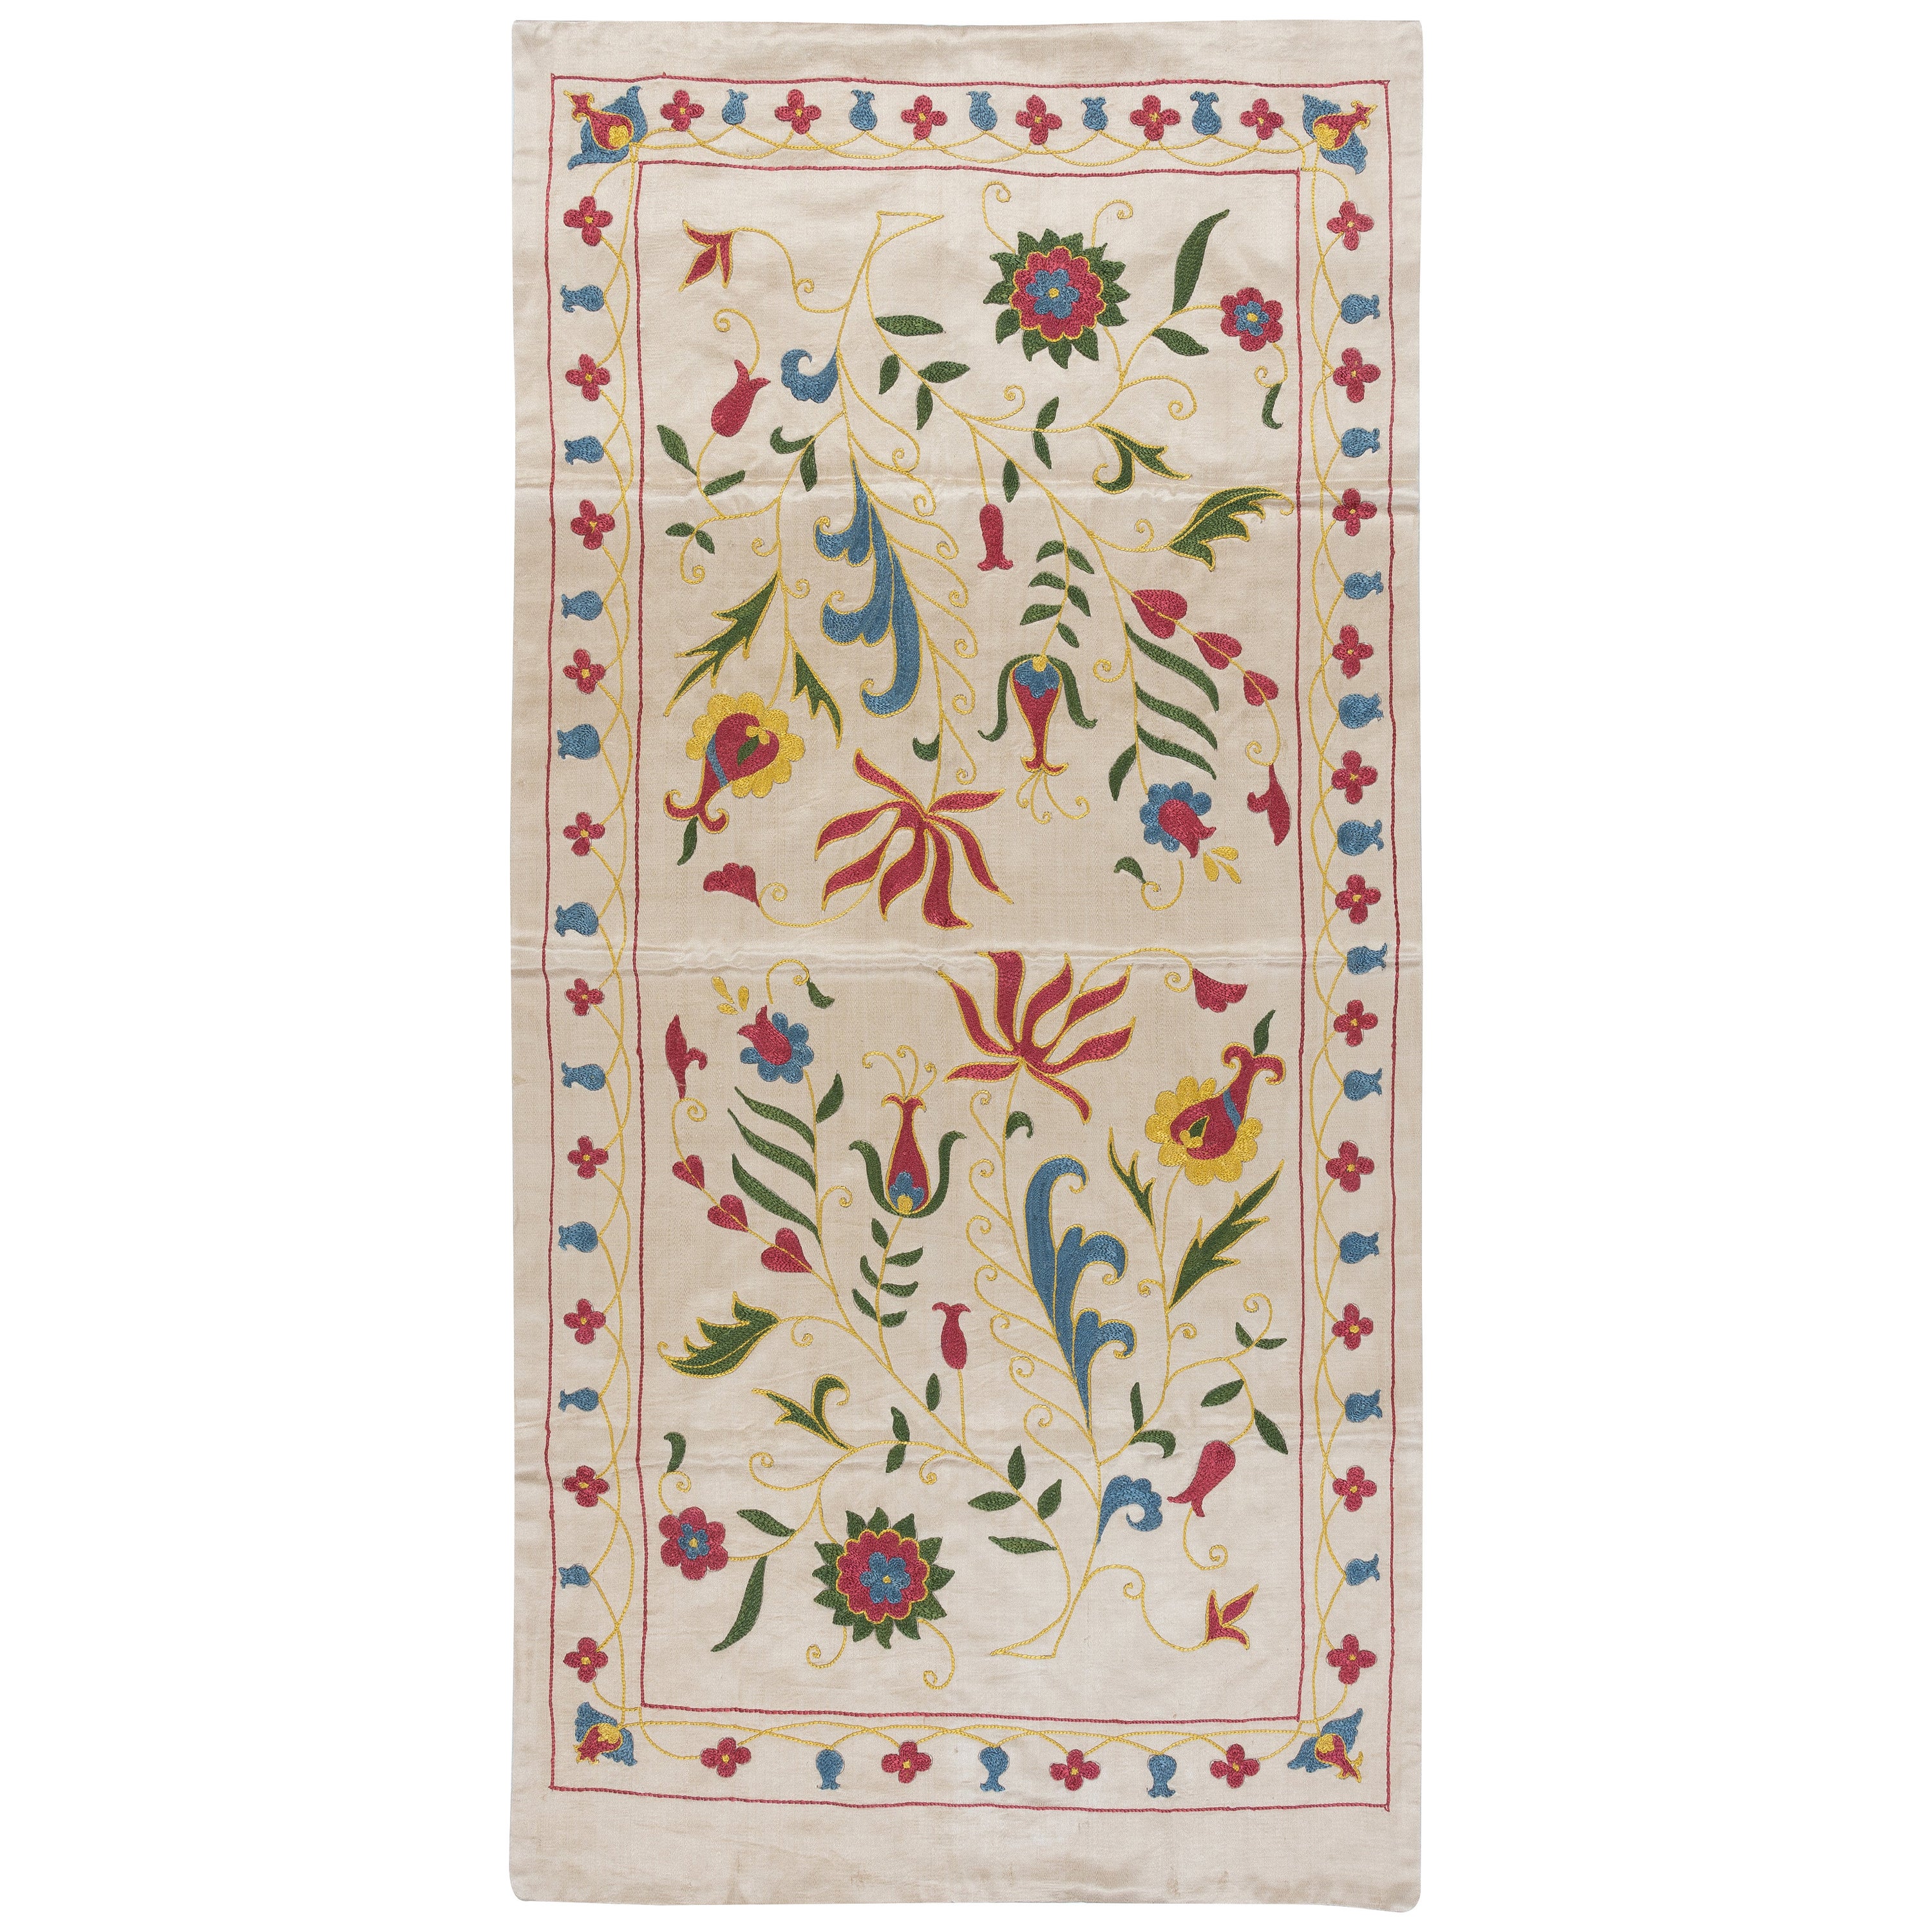 20"x40" 100% Silk Wall Hanging, Wall Decor, Embroidered Cloth, Suzani Tapestry